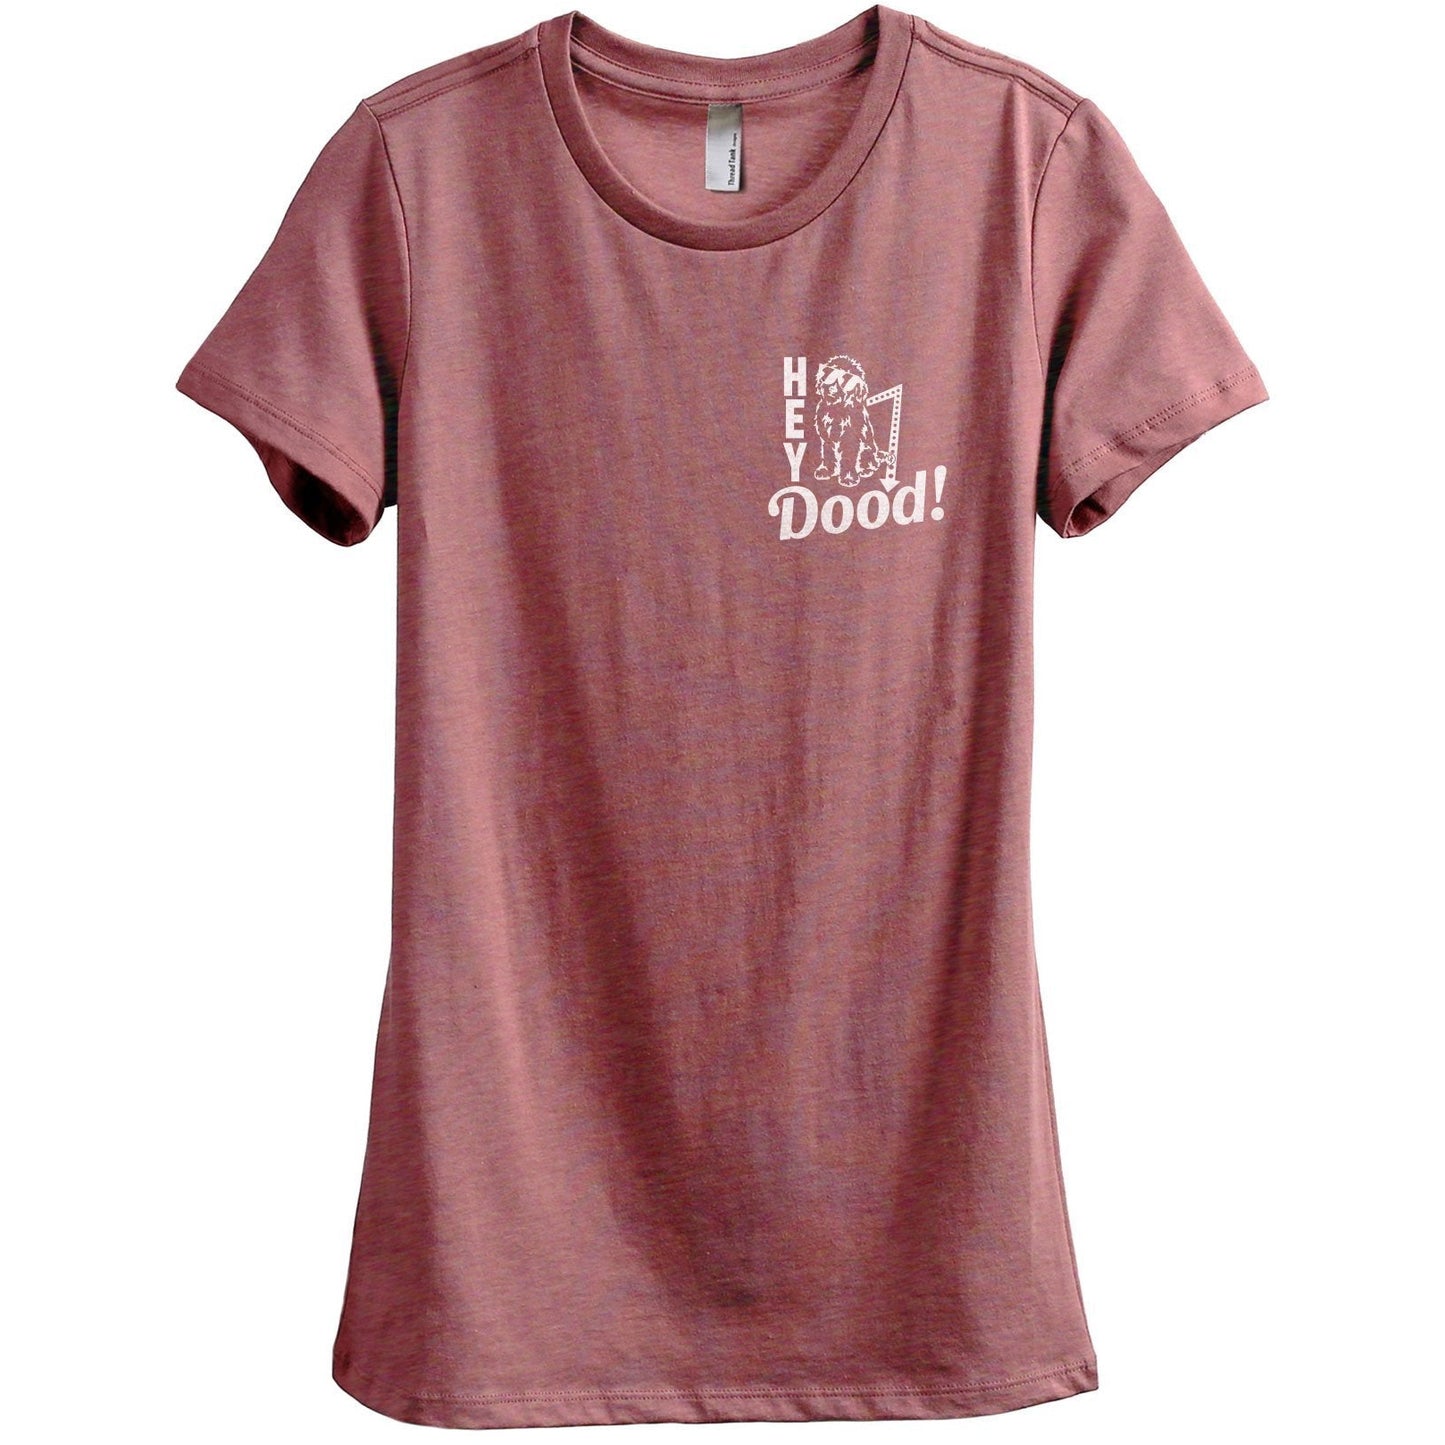 Hey Doodle Dog Women's Relaxed Crewneck T-Shirt Top Tee Heather Rouge